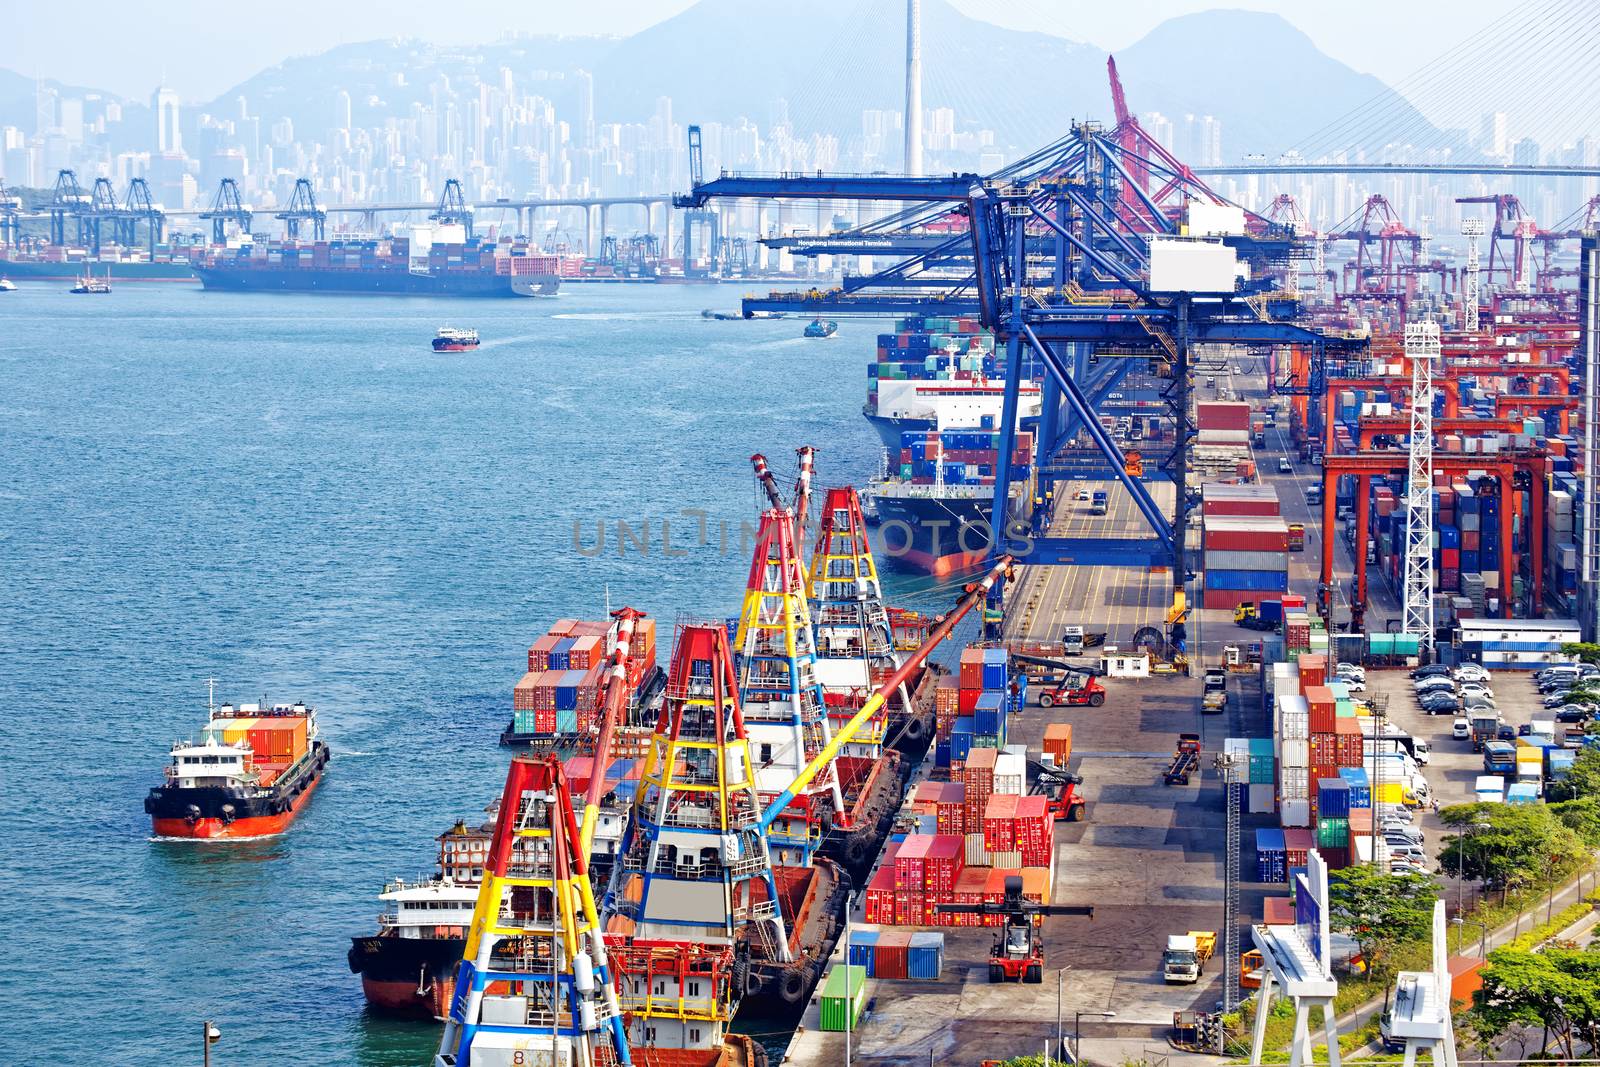 Containers at Hong Kong commercial port at day